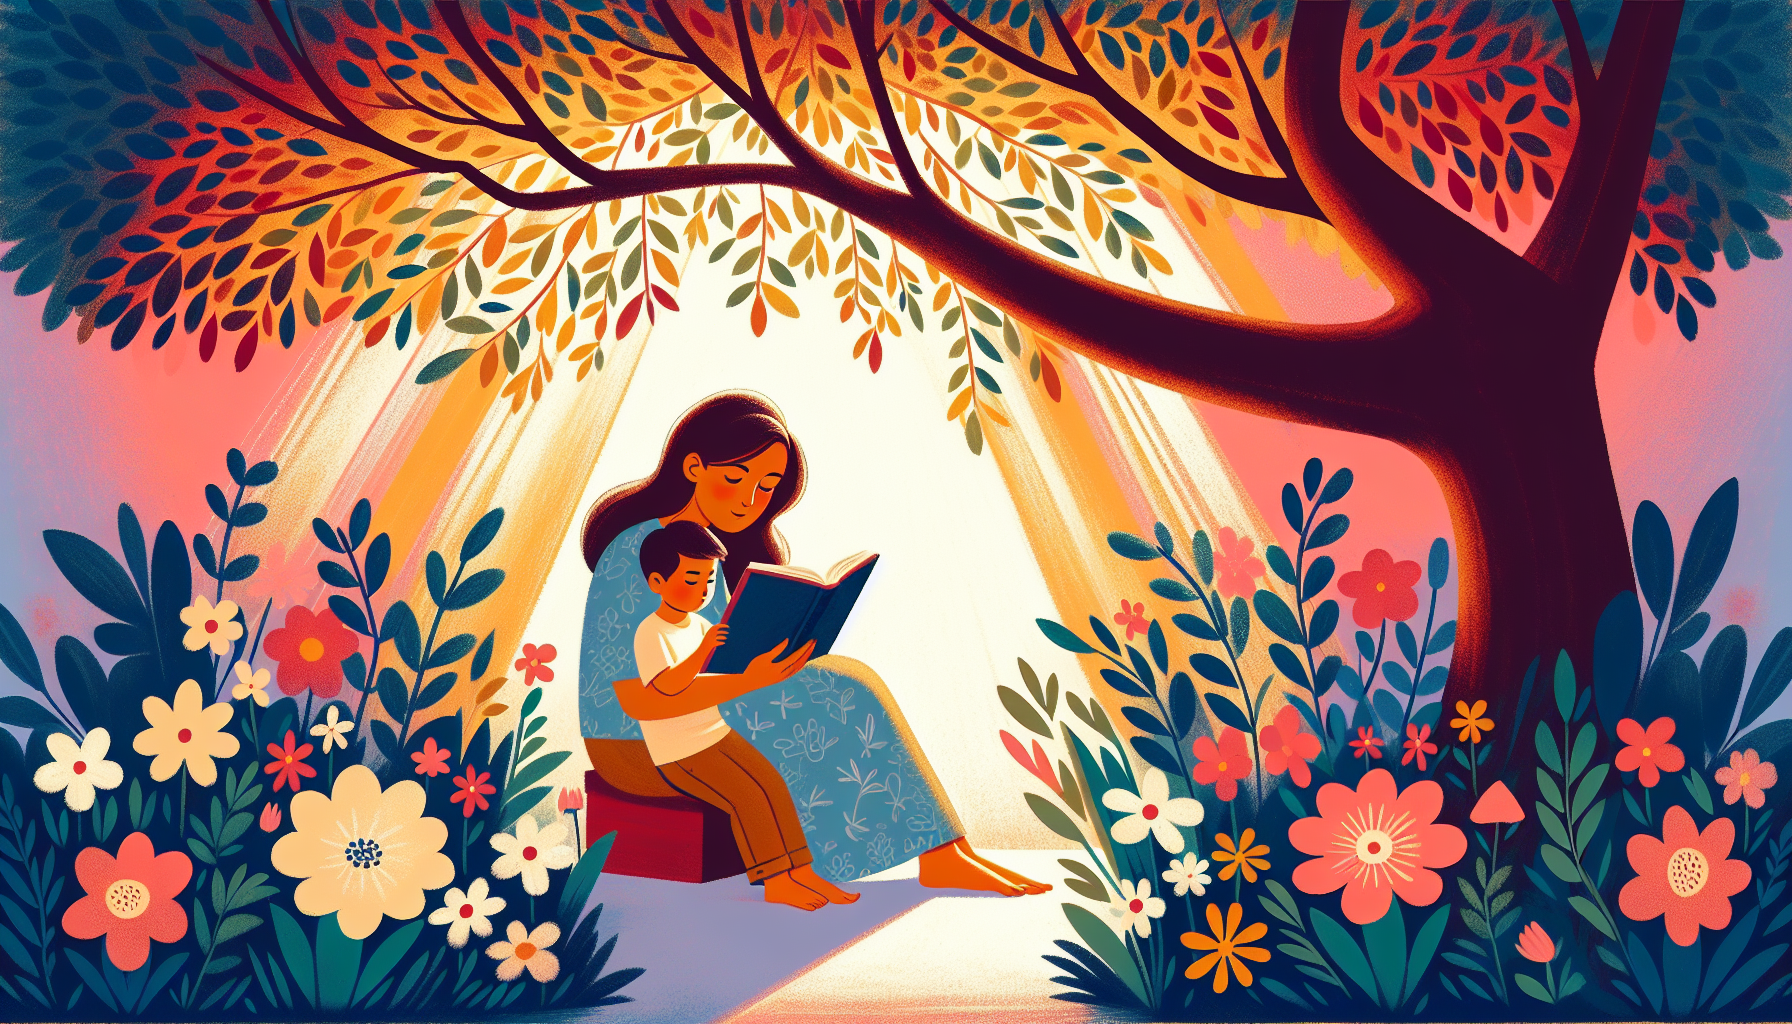 Peaceful garden setting with a mother and child reading the Bible together under a blossoming tree, surrounded by colorful flowers and soft afternoon light.